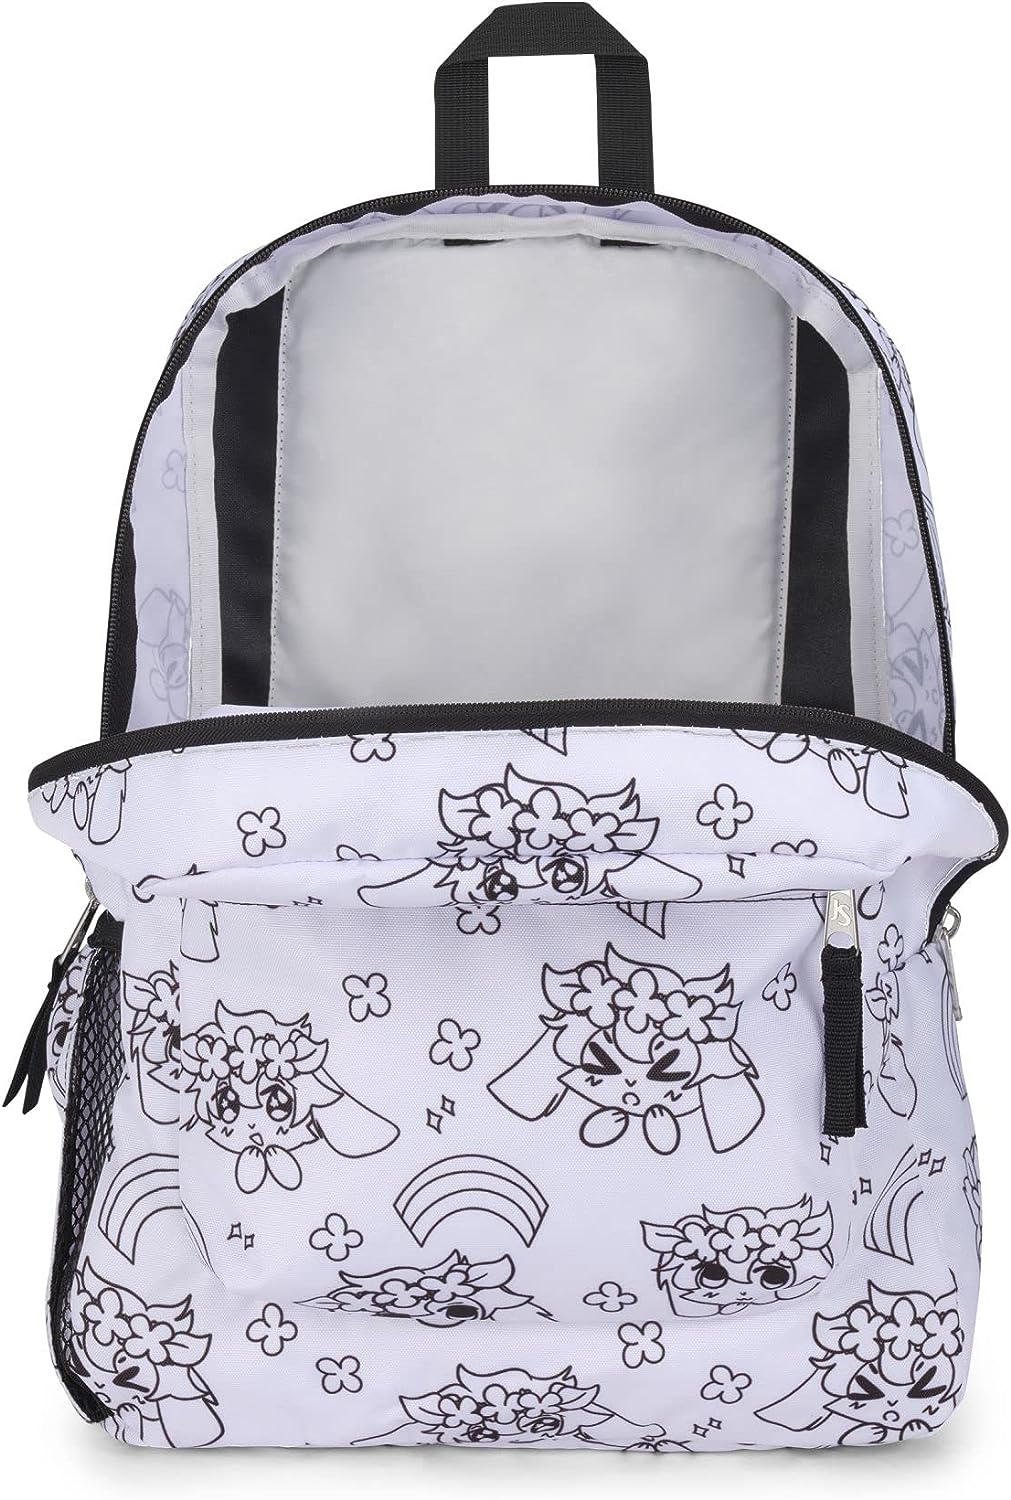 JanSport Backpack Cross Town Anime Emotions